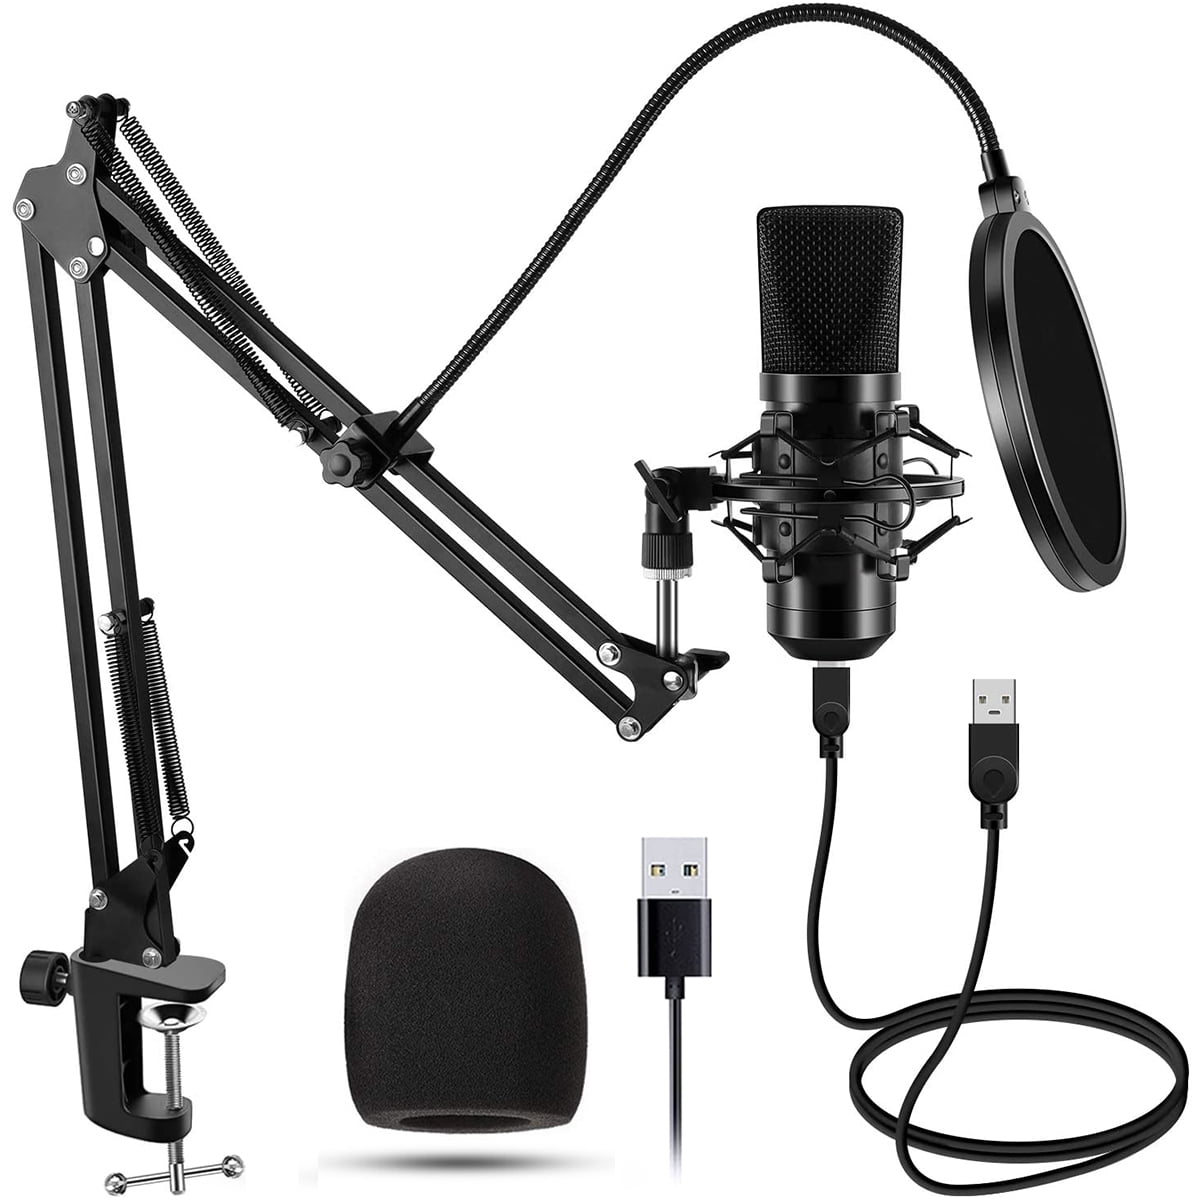 192KHz/24BIT Plug & Play Professional Cardioid Condenser Streaming Mic with Boom Arm Metal Shock Mount Pop Filter for Vocal Music Recording PC Youtube Delam USB Studio Podcast Gaming Microphone Kit 